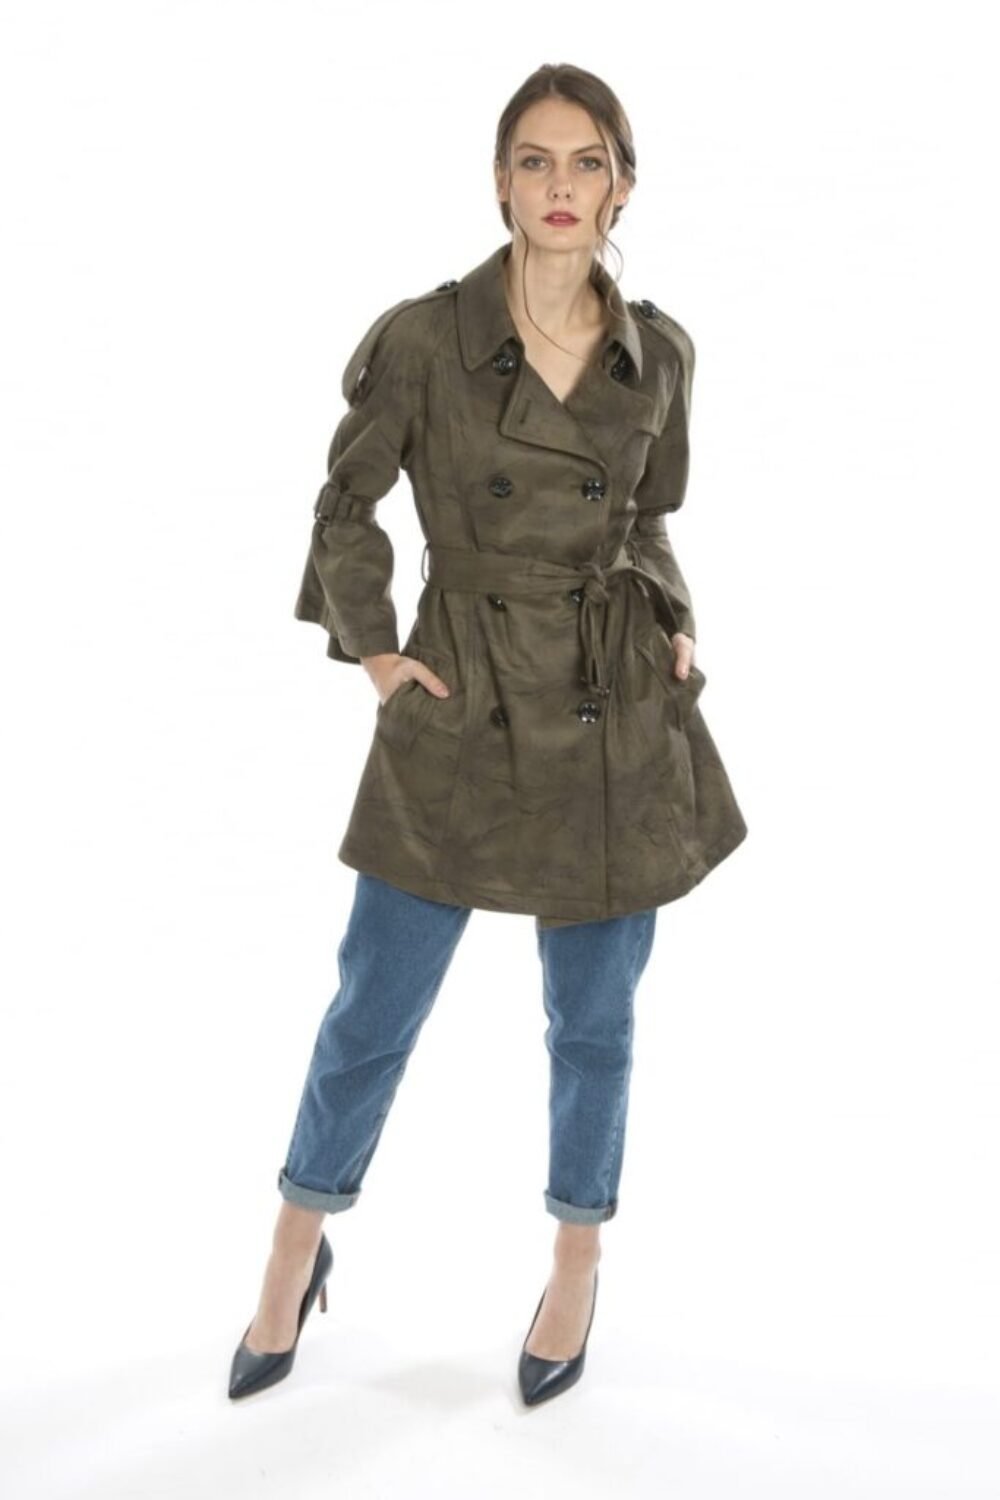 Shop Lux Green Faux Suede Trench Coat and women's luxury and designer clothes at www.lux-apparel.co.uk